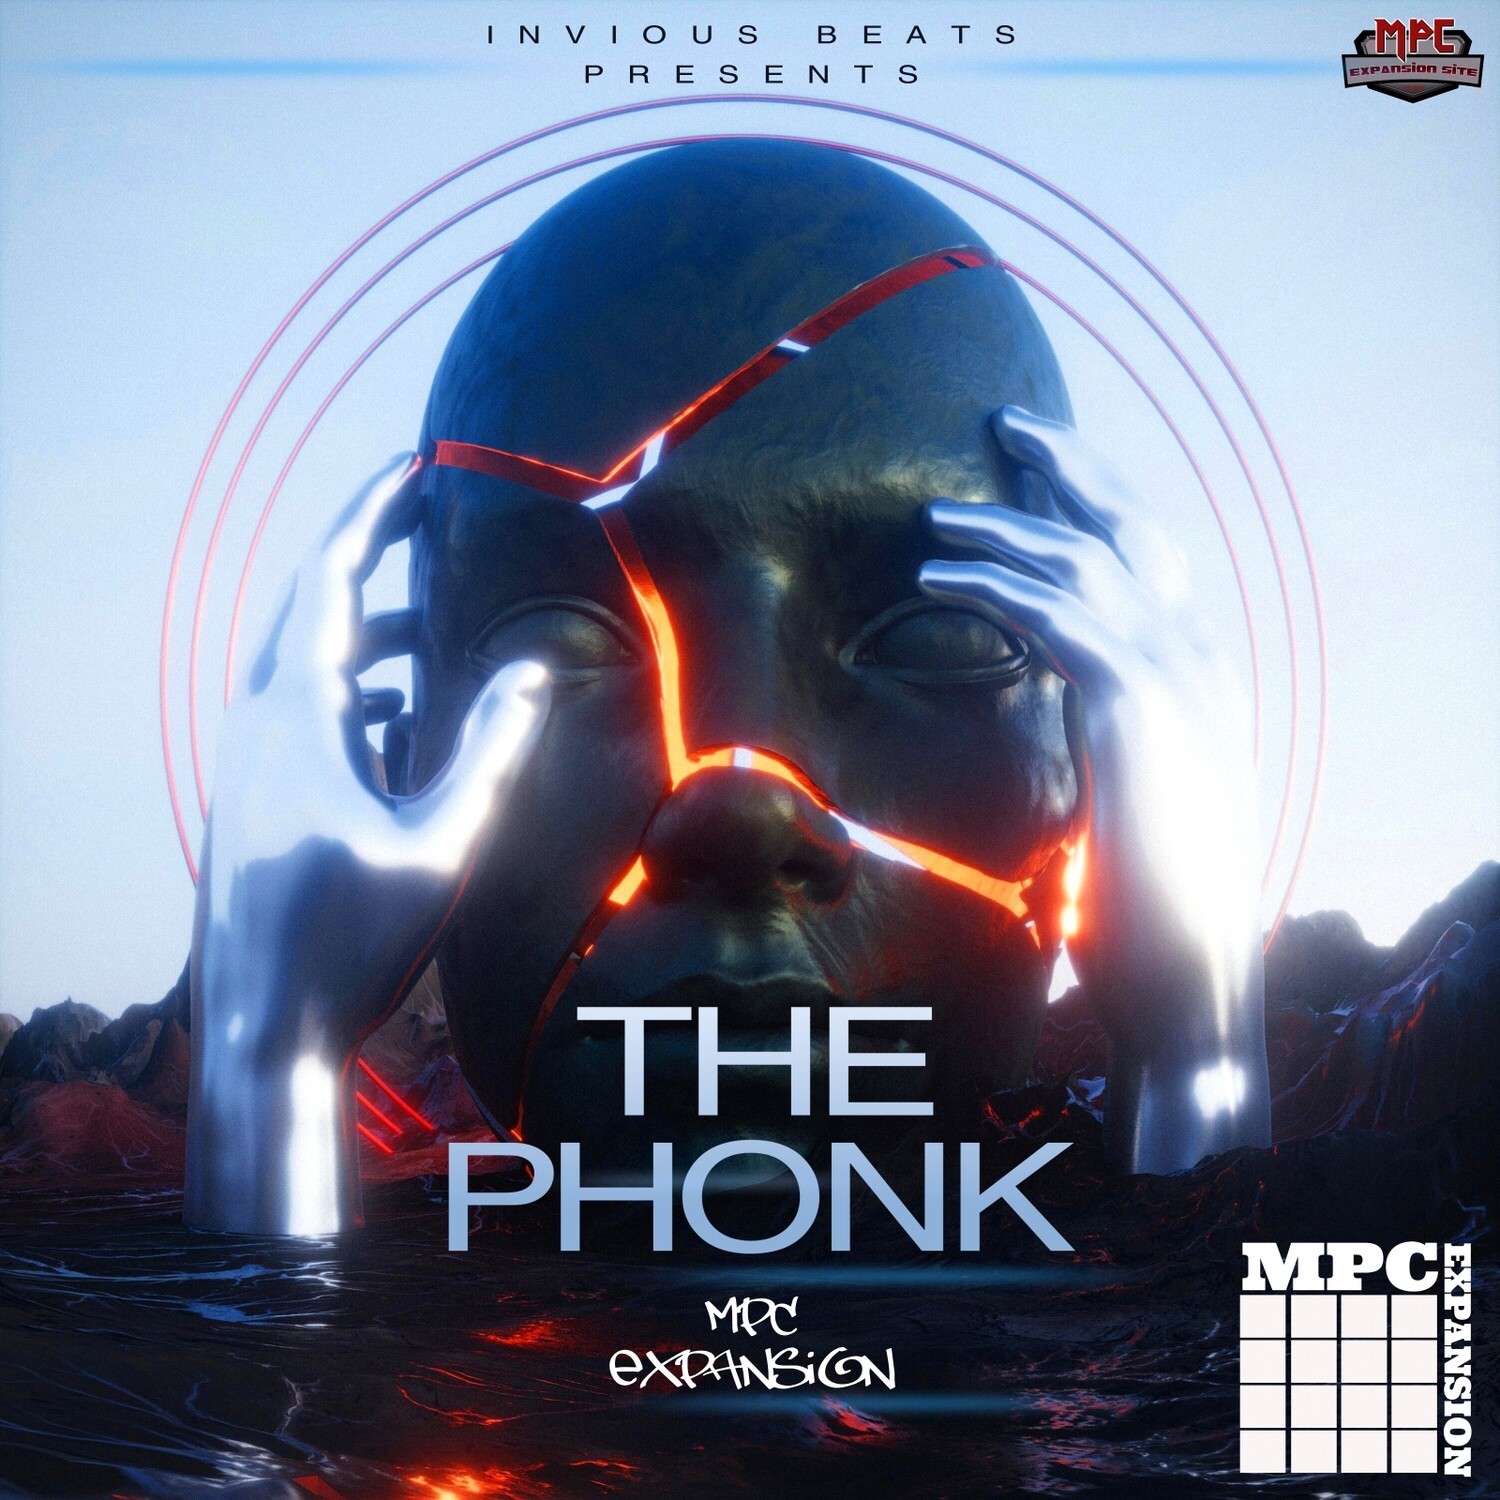 MPC EXPANSION 'THE PHONK' by INVIOUS